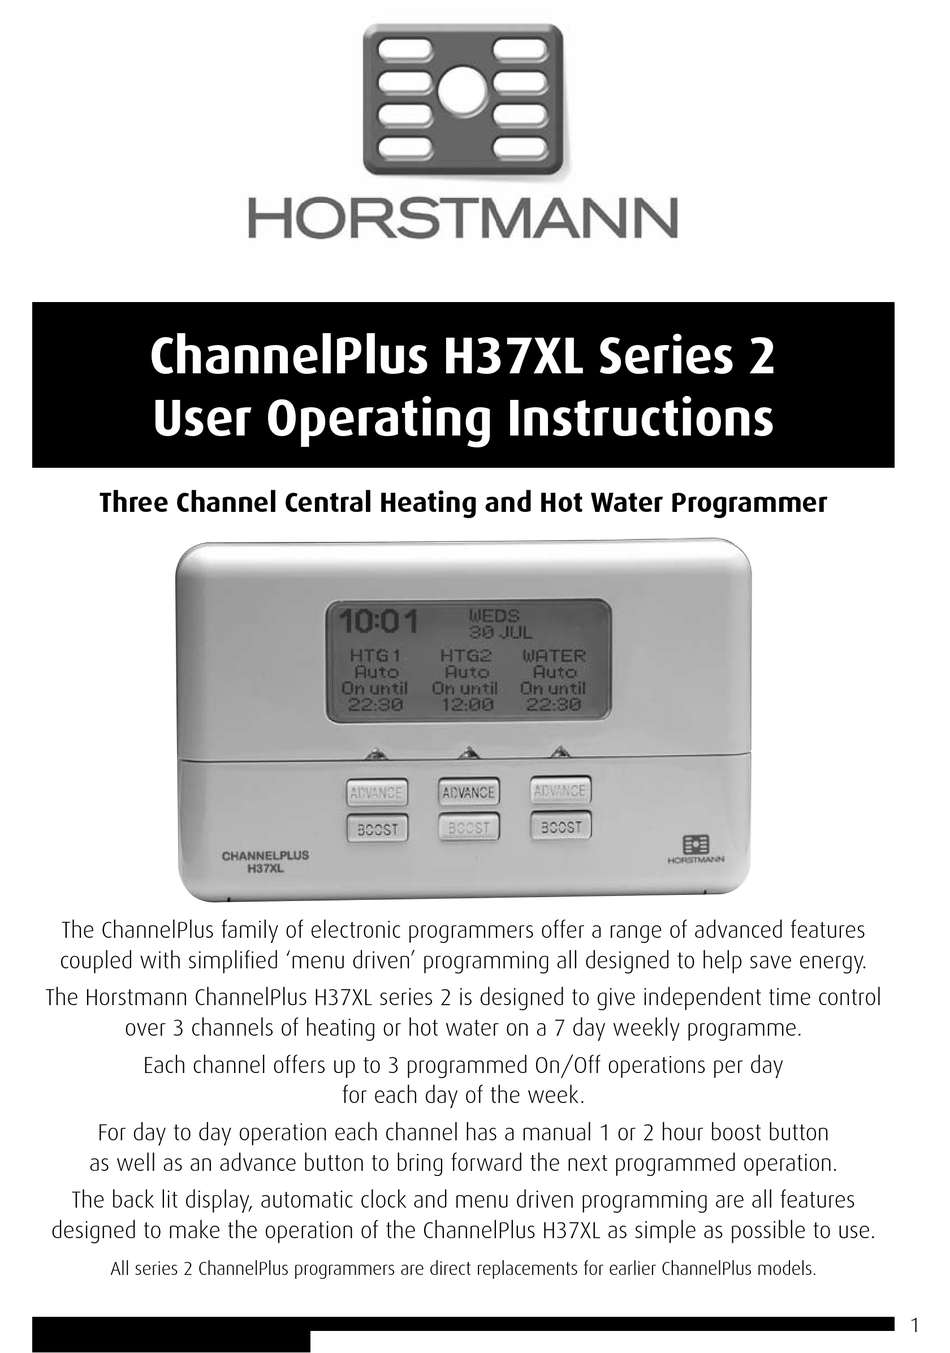 HORSTMANN CHANNELPLUS H37XL SERIES 2 USER OPERATING INSTRUCTIONS MANUAL